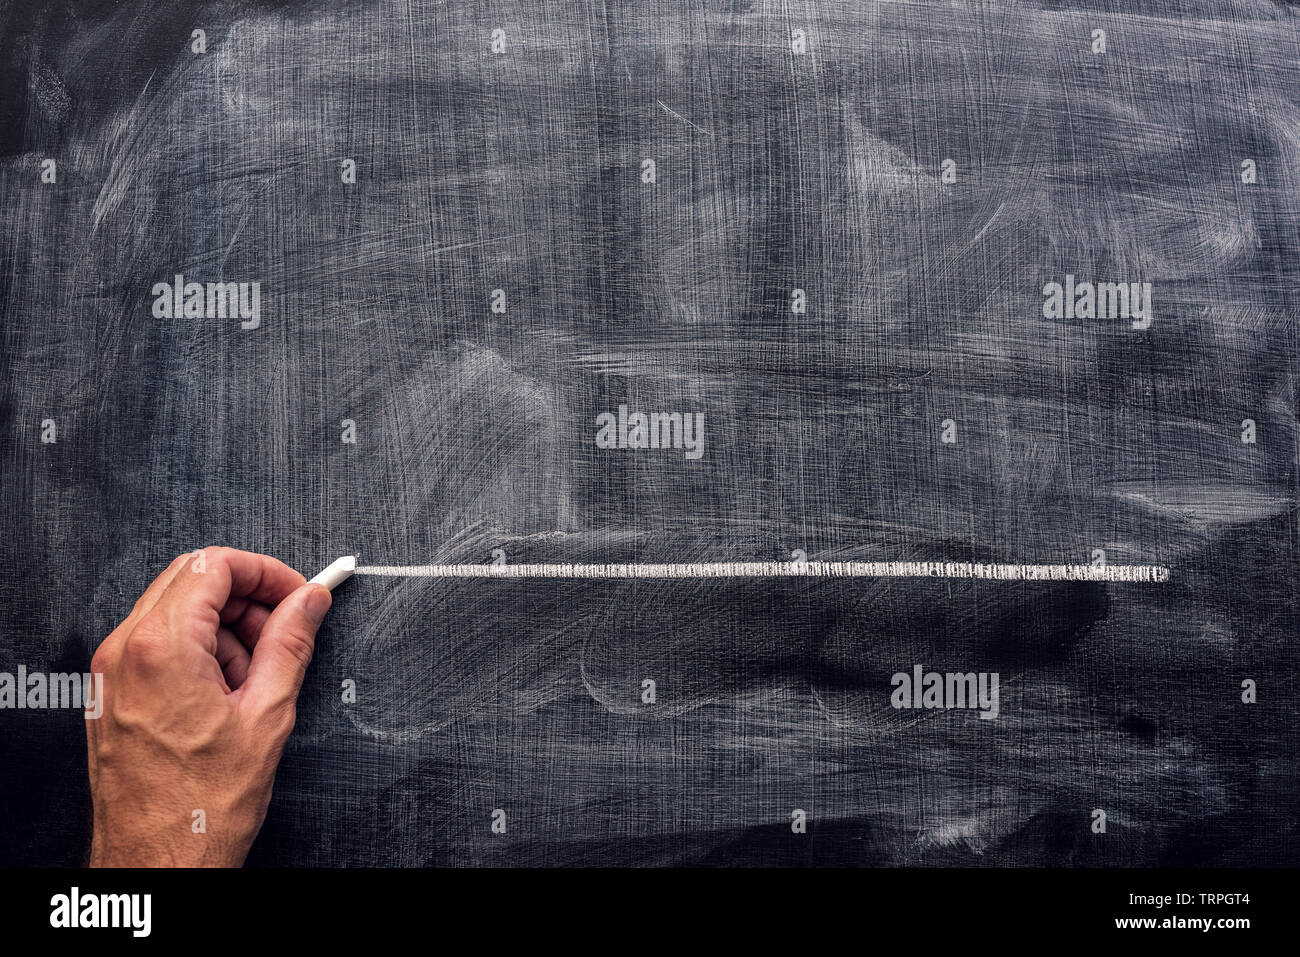 Hand underlining with chalk on school blackboard. Teacher emphasizing something important, mock up copy space Stock Photo